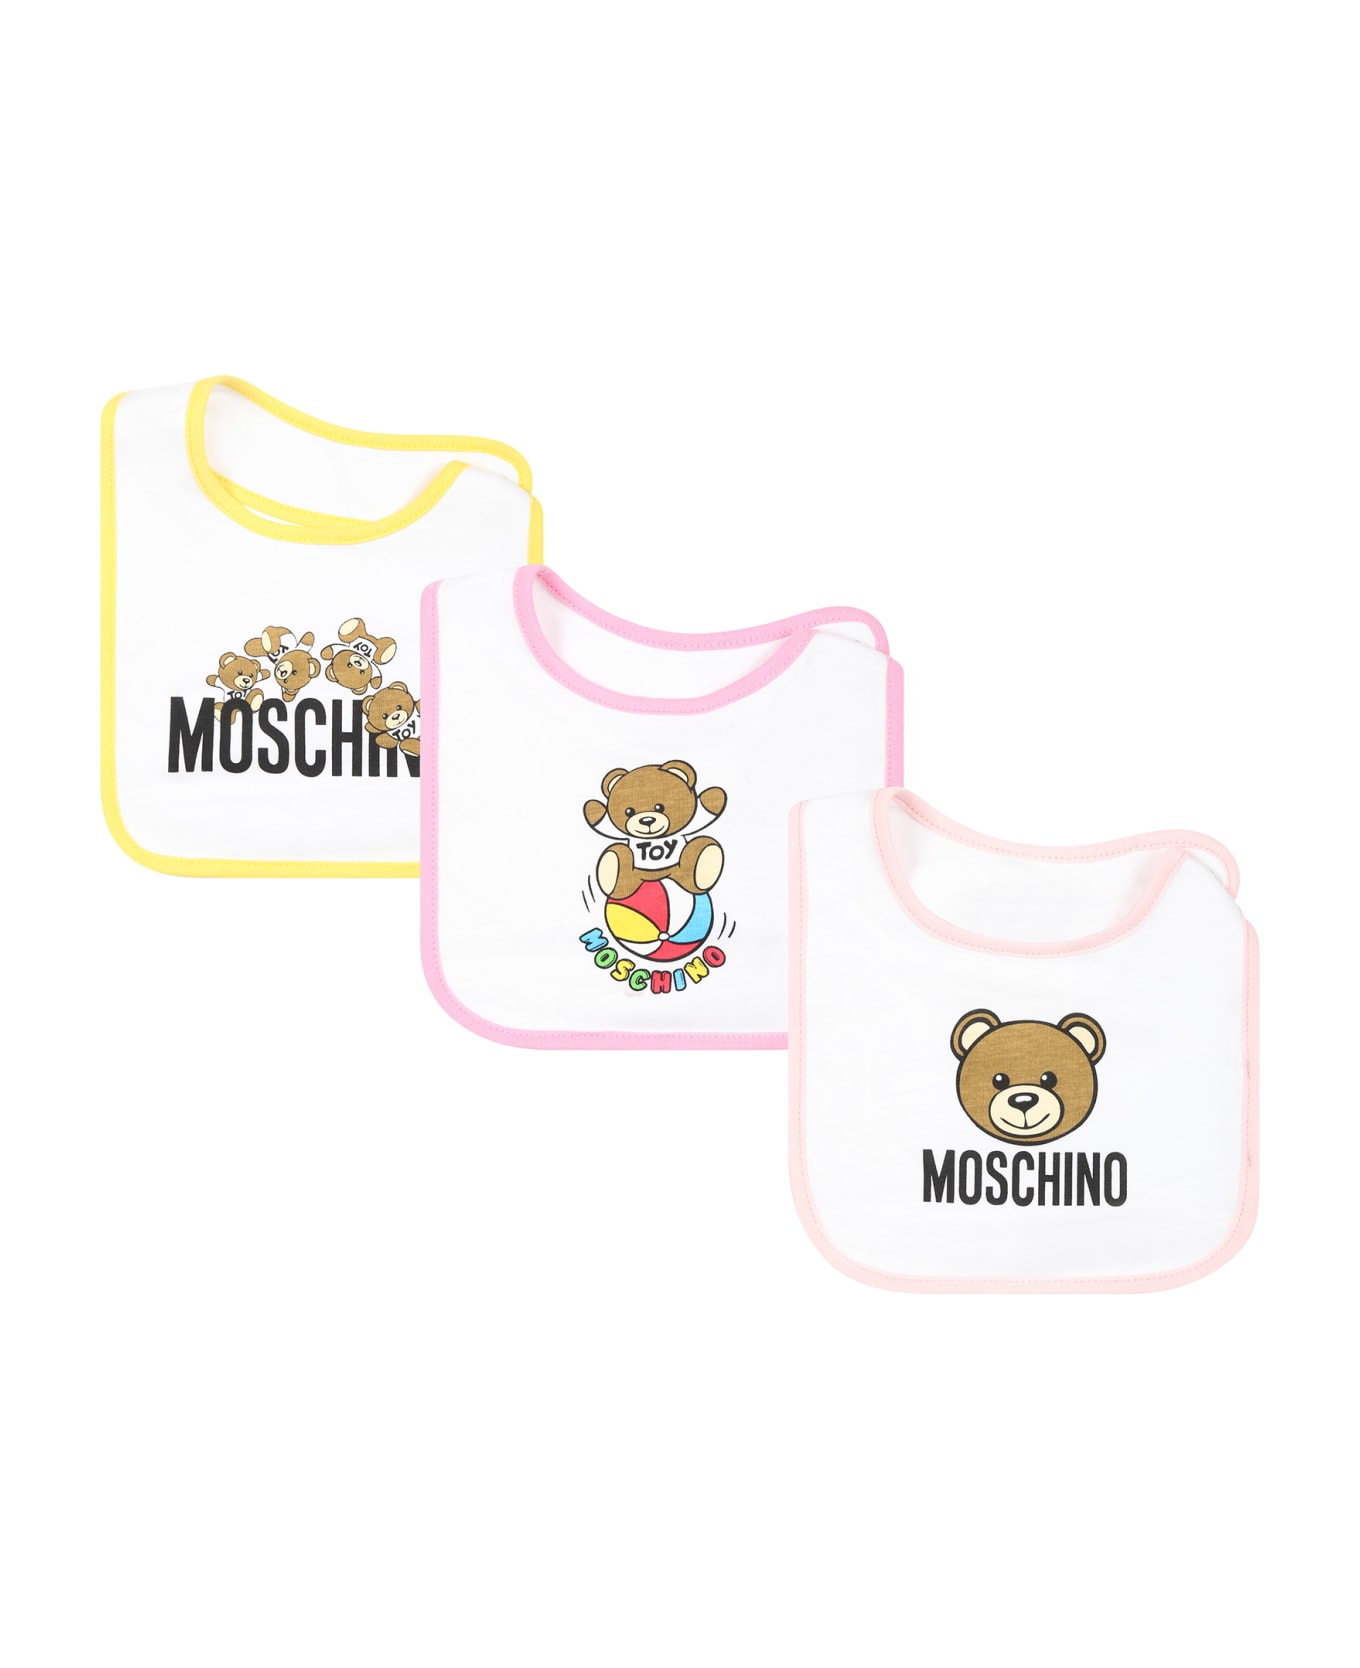 Moschino White Set For Baby Girl With Teddy Bear And Logo - White